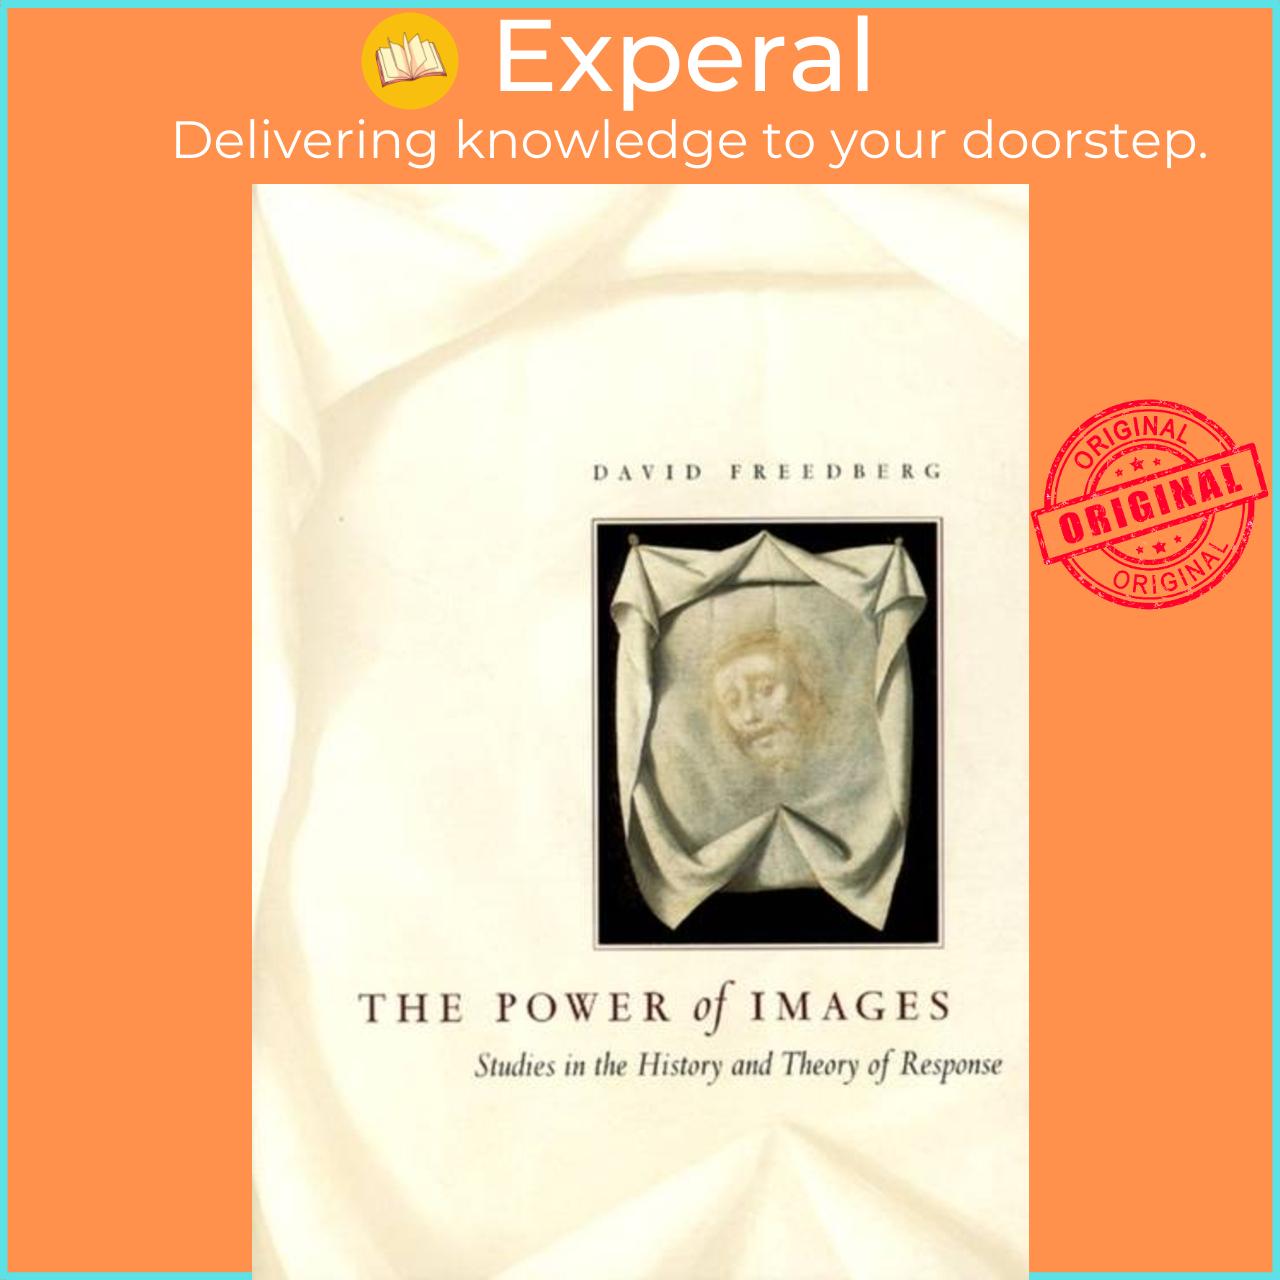 Sách - The Power of Images - Stus in the History and Theory of Response by David Freedberg (UK edition, paperback)